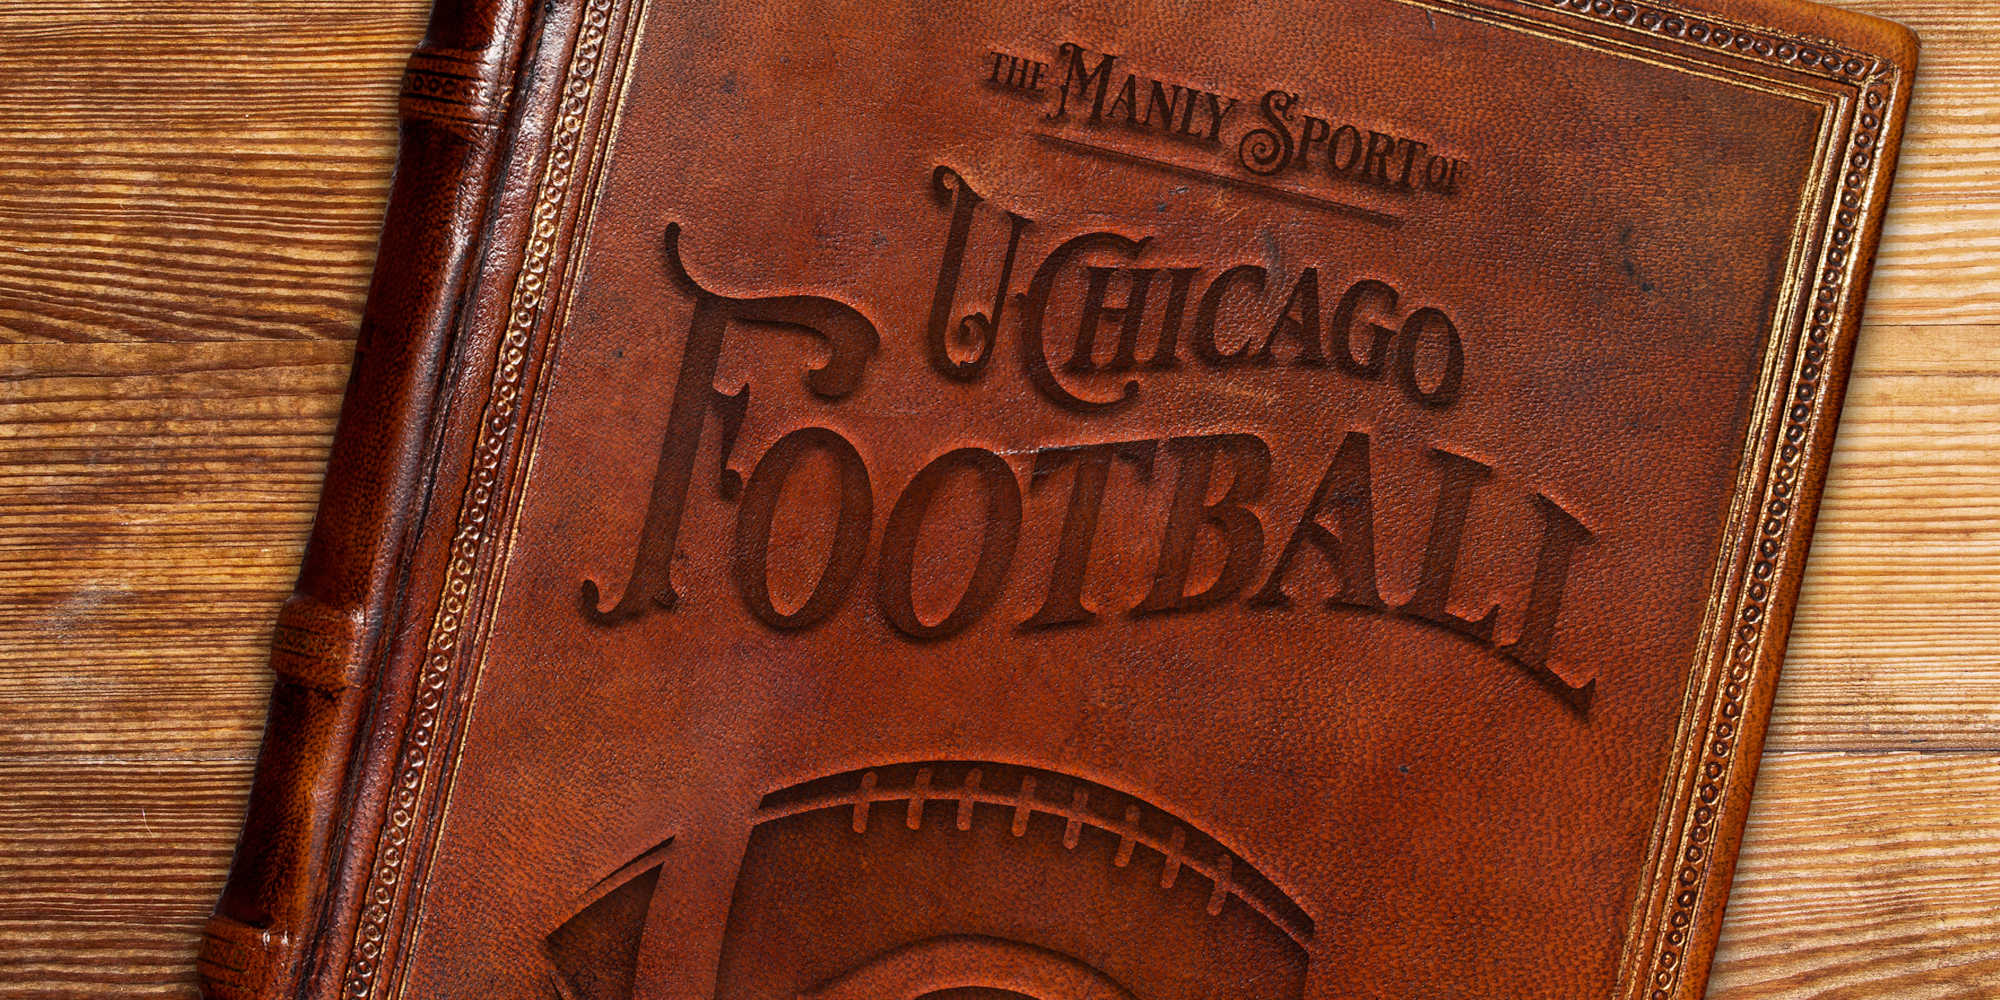 The Manly Sport of UChicago Football